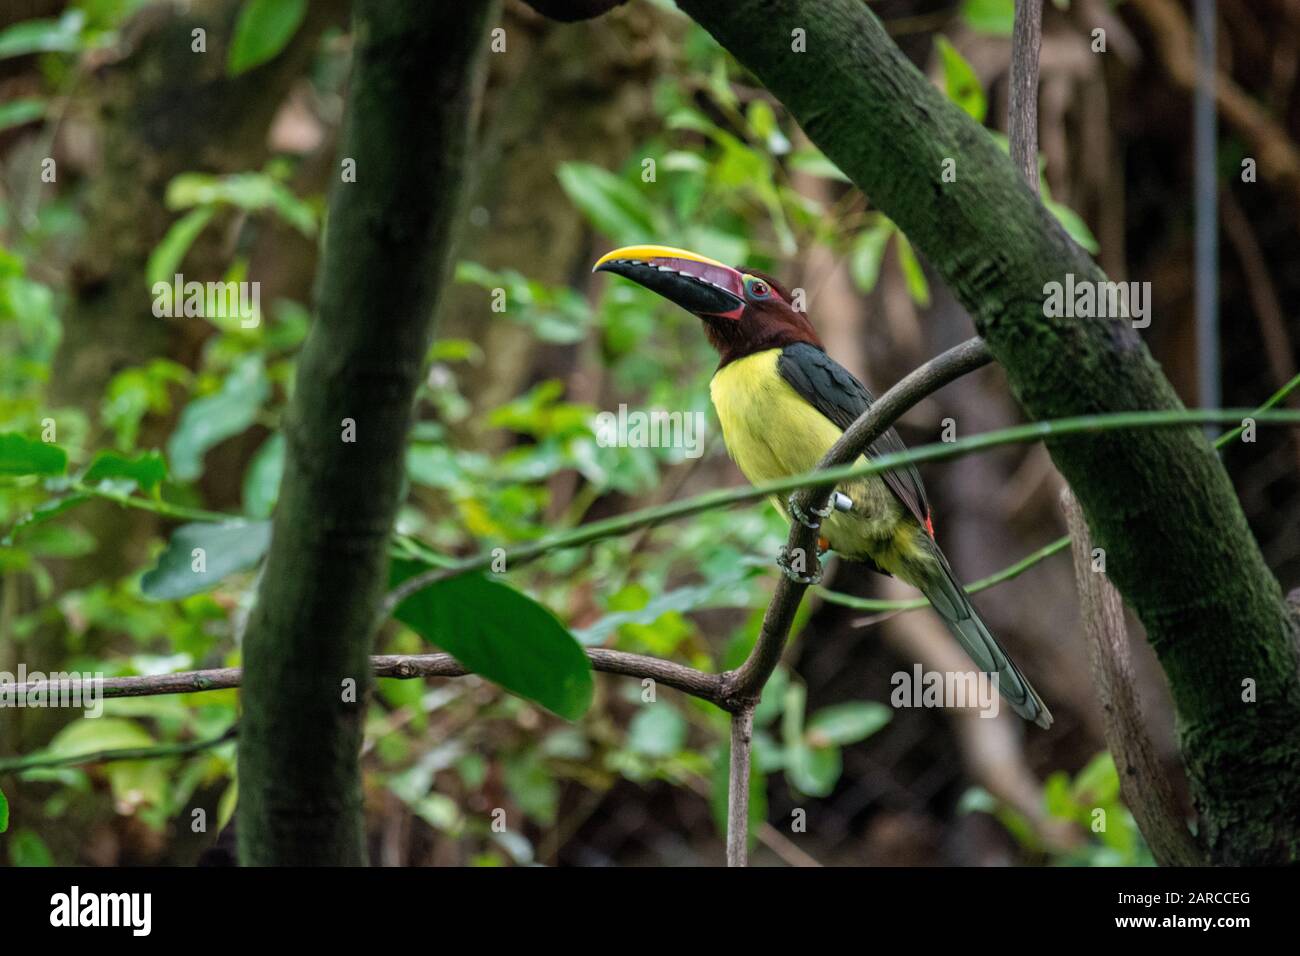 Cute hornbill bird perched on a tree branch with a blurred background Stock Photo